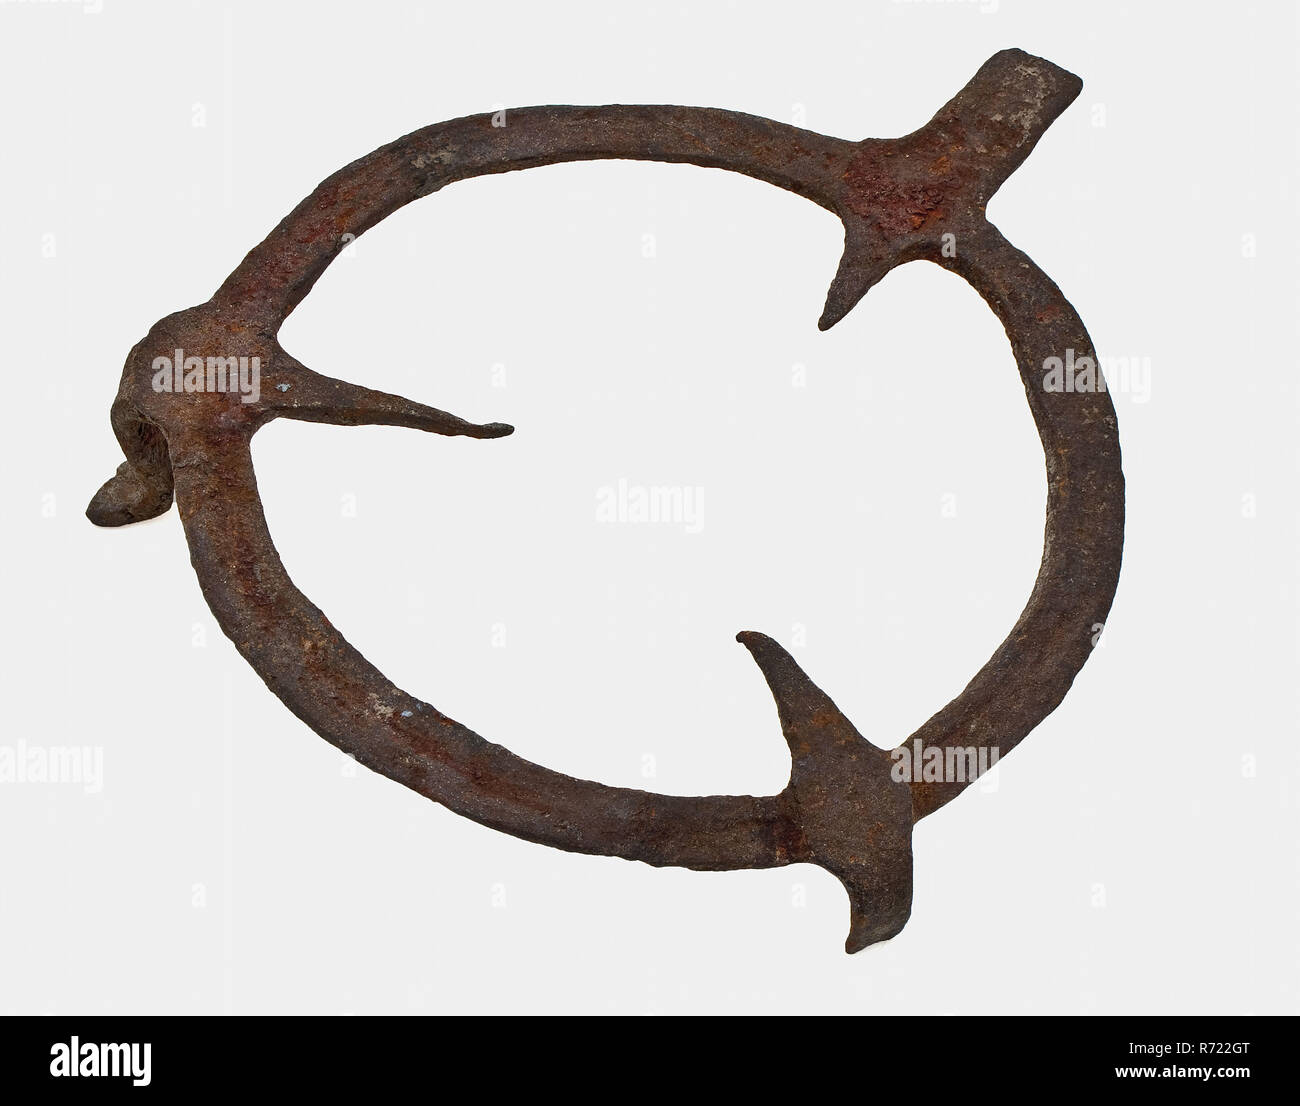 https://c8.alamy.com/comp/R722GT/iron-trivet-trims-equipment-tool-found-iron-metal-forged-round-iron-trivet-or-trivet-on-three-curved-legs-three-inward-pointing-points-on-the-ring-fragment-of-handle-archeology-underground-pit-rotterdam-city-triangle-blaak-groenendaal-cooking-hearth-kitchen-food-preparation-nutrition-soil-discovery-dirty-low-underground-pit-groenendaal-direction-blaakstation-3-4-meters-below-np-1977-R722GT.jpg